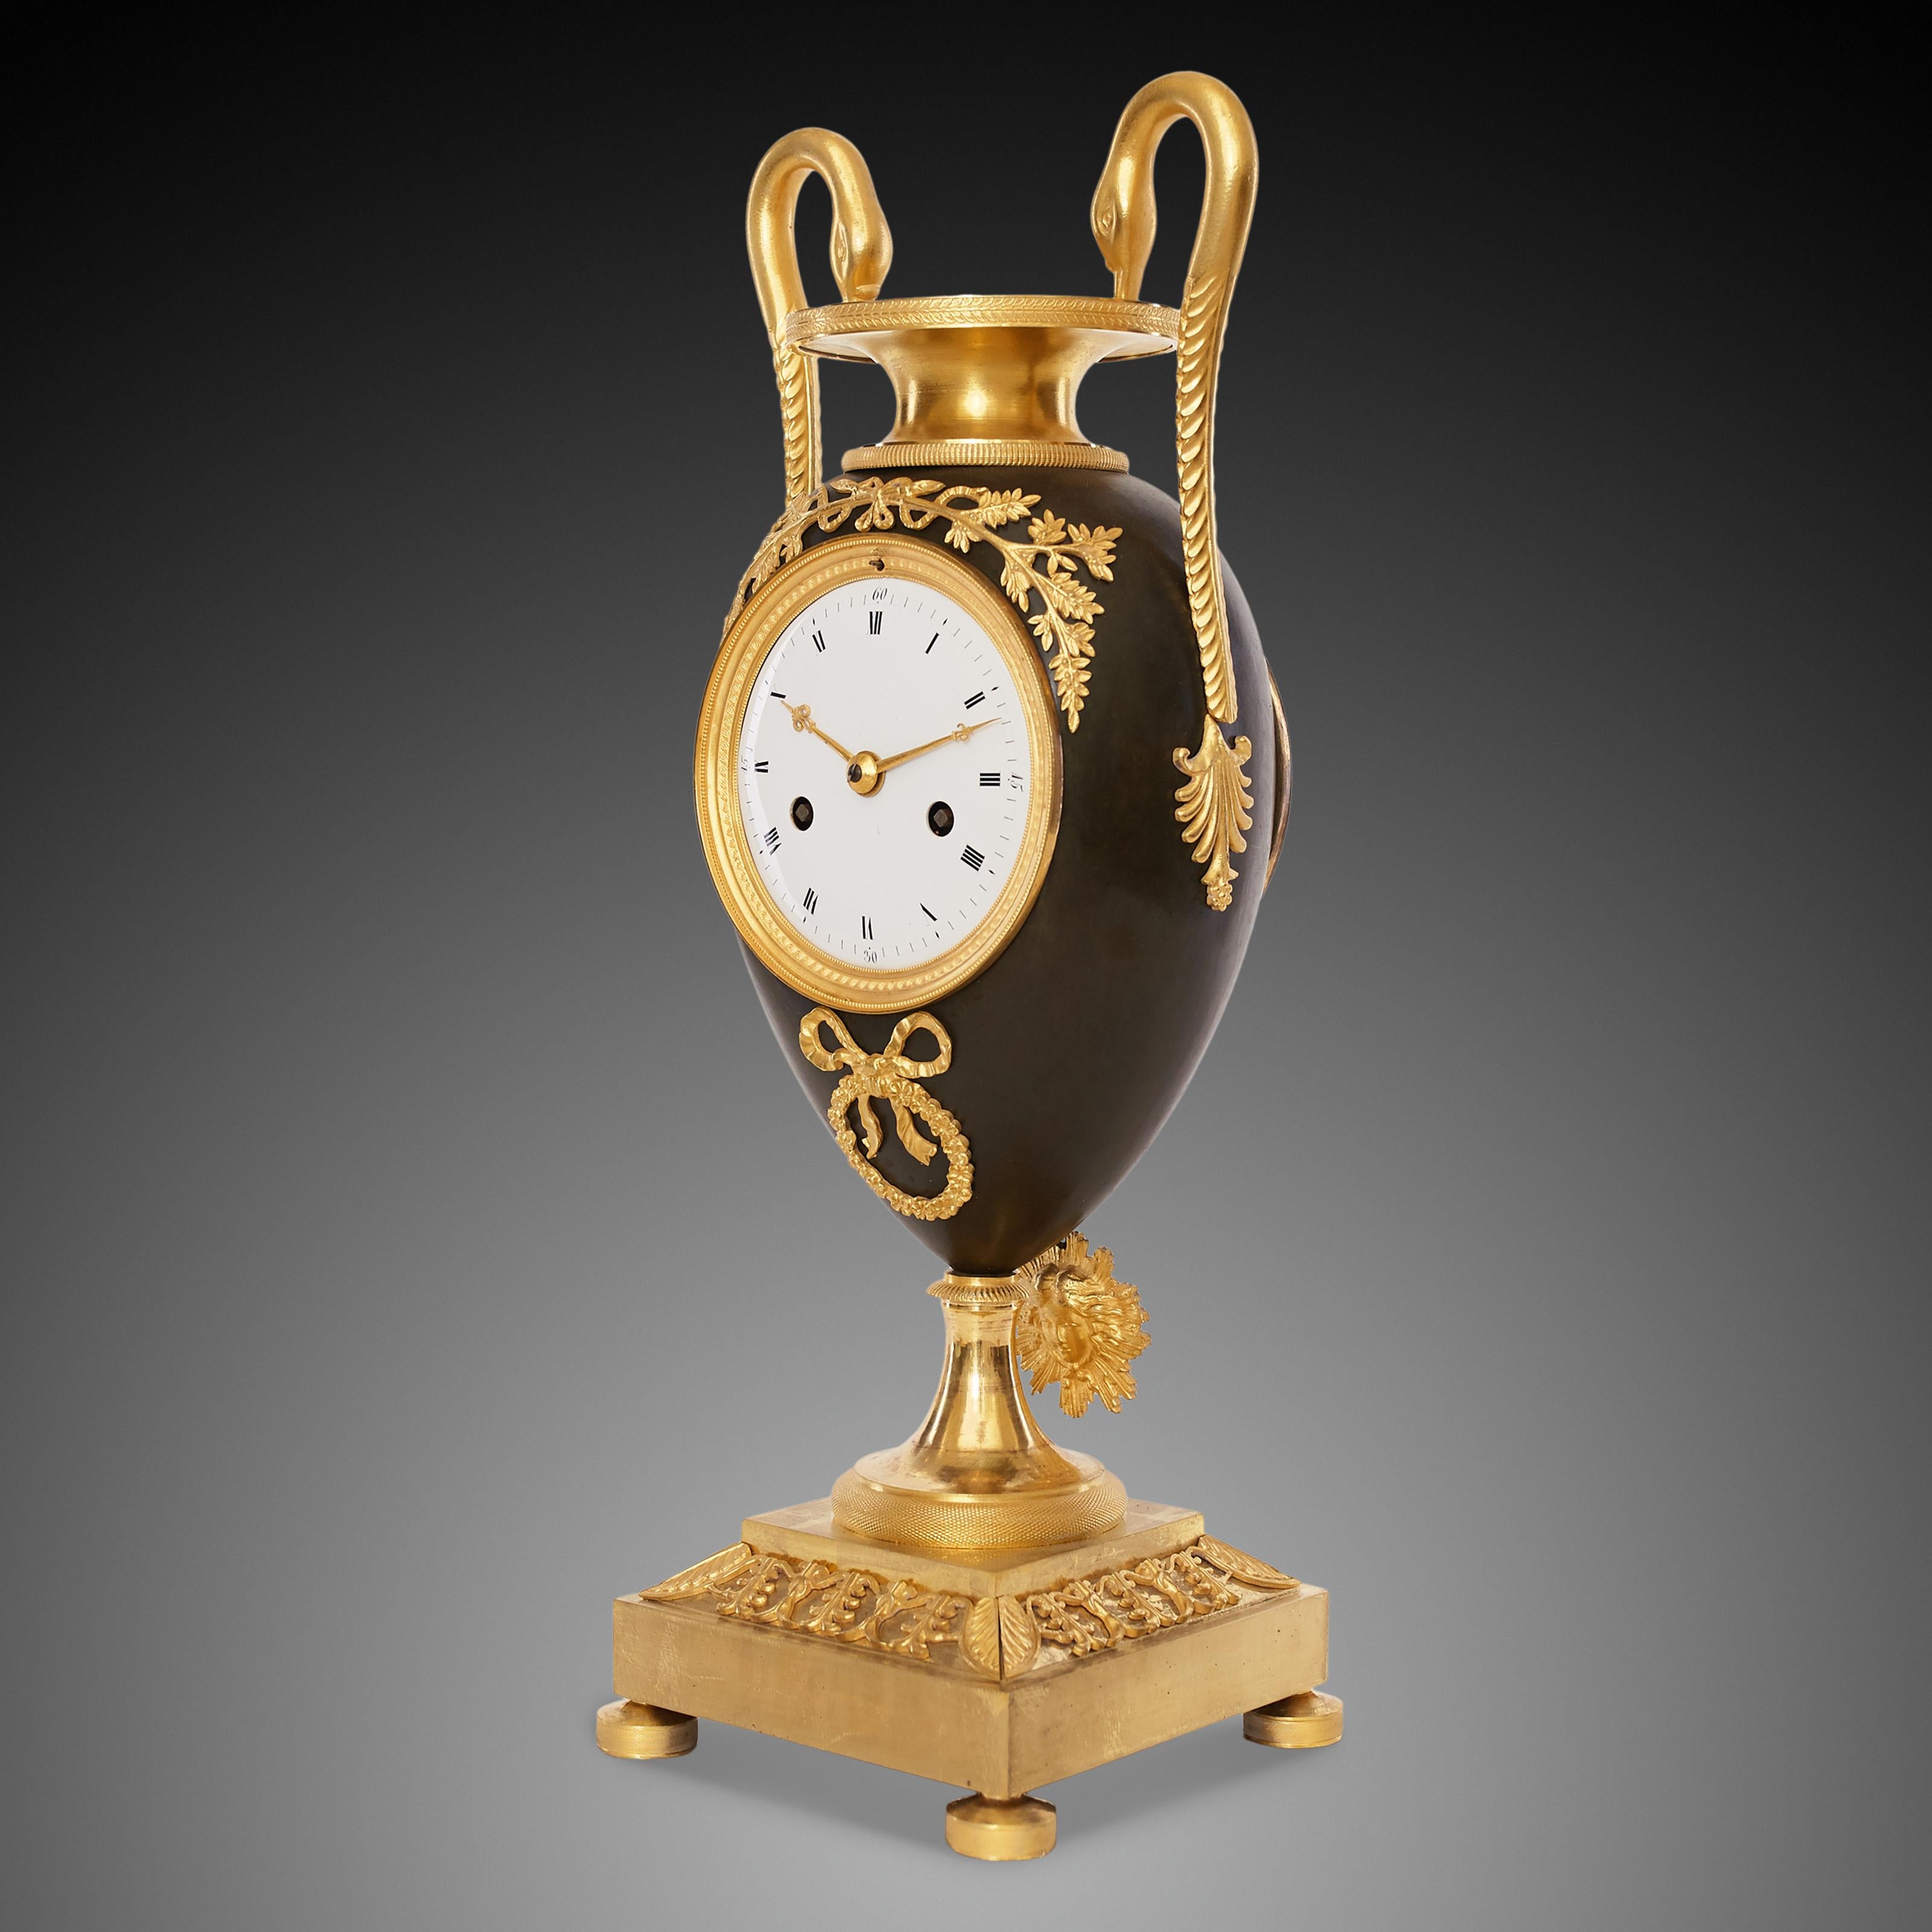 This Etruscan vase-shaped mantel clock cast from bronze with gilded elements and brown patina originated from the first half of the nineteenth century. The Empire style was based on elements of the Roman Empire and its culture, which had been